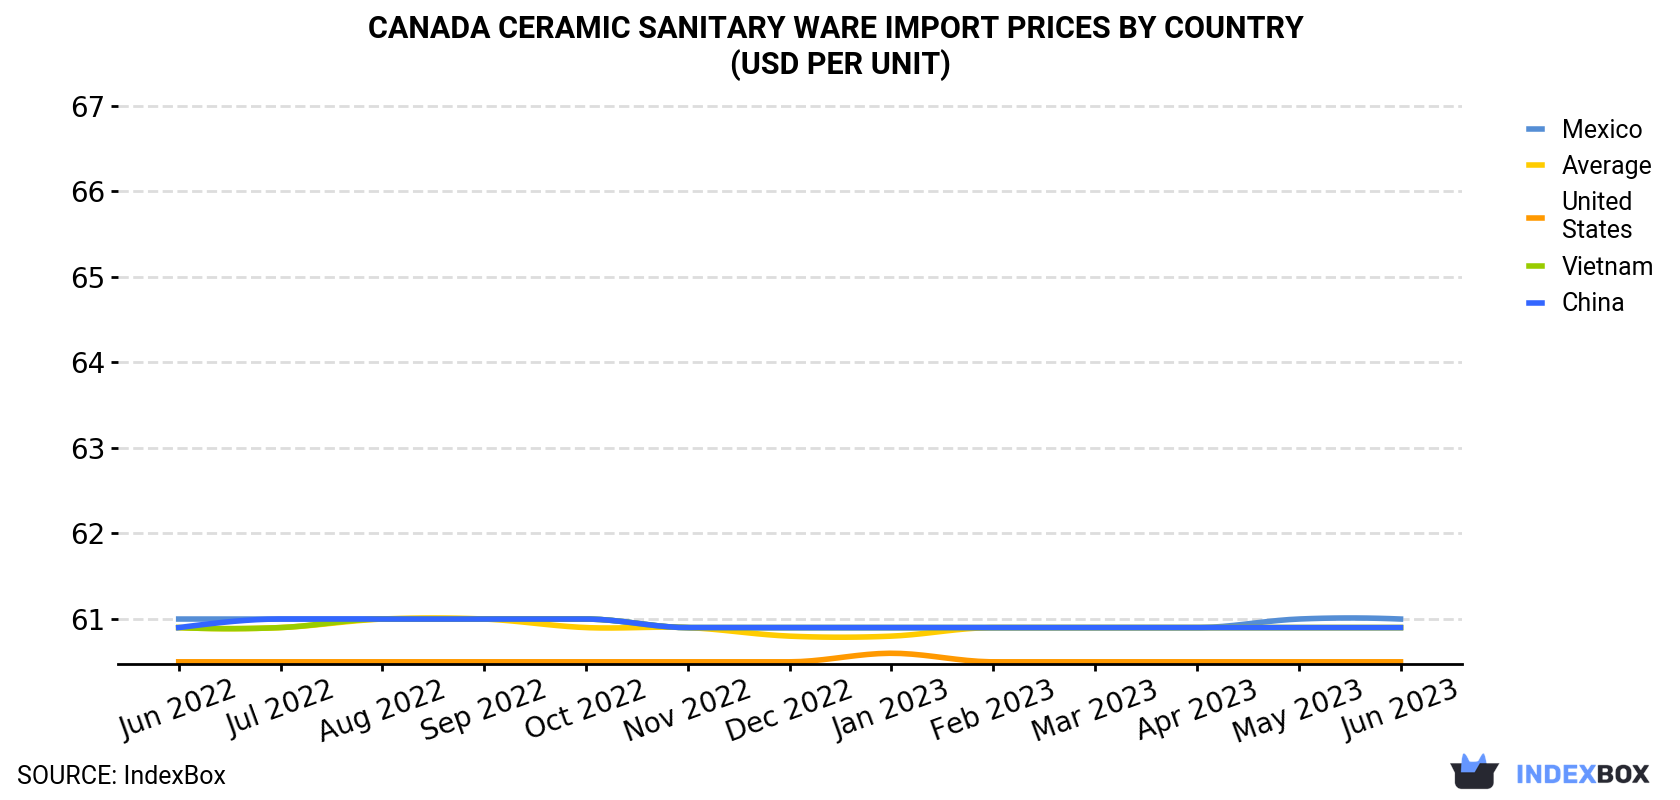 Canada Ceramic Sanitary Ware Import Prices By Country (USD Per Unit)